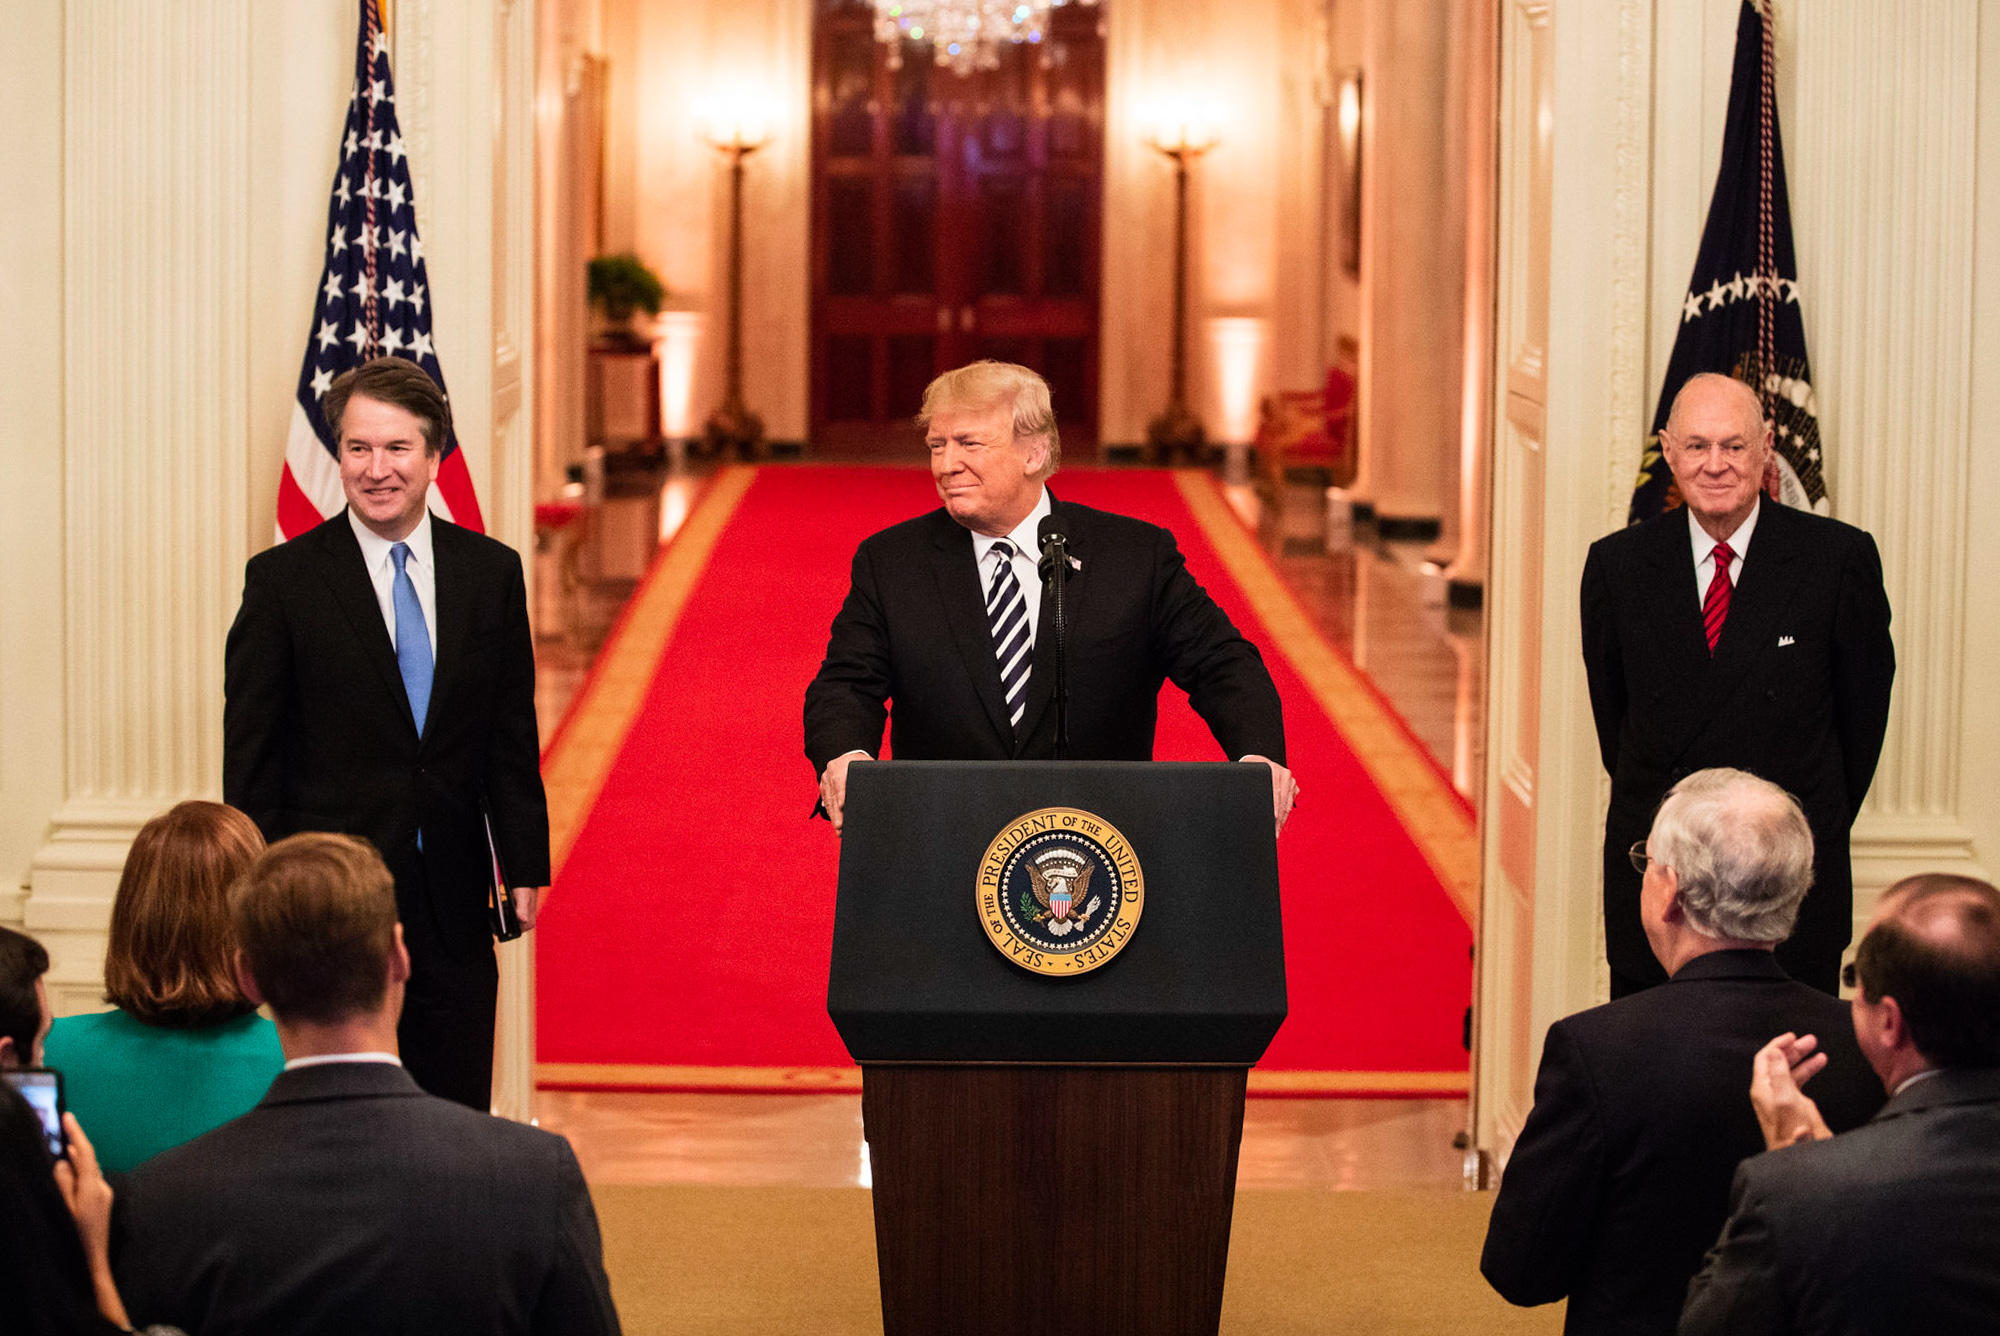 Donald Trump at a podium next to Anthony Kennedy and Brett Kavanaugh